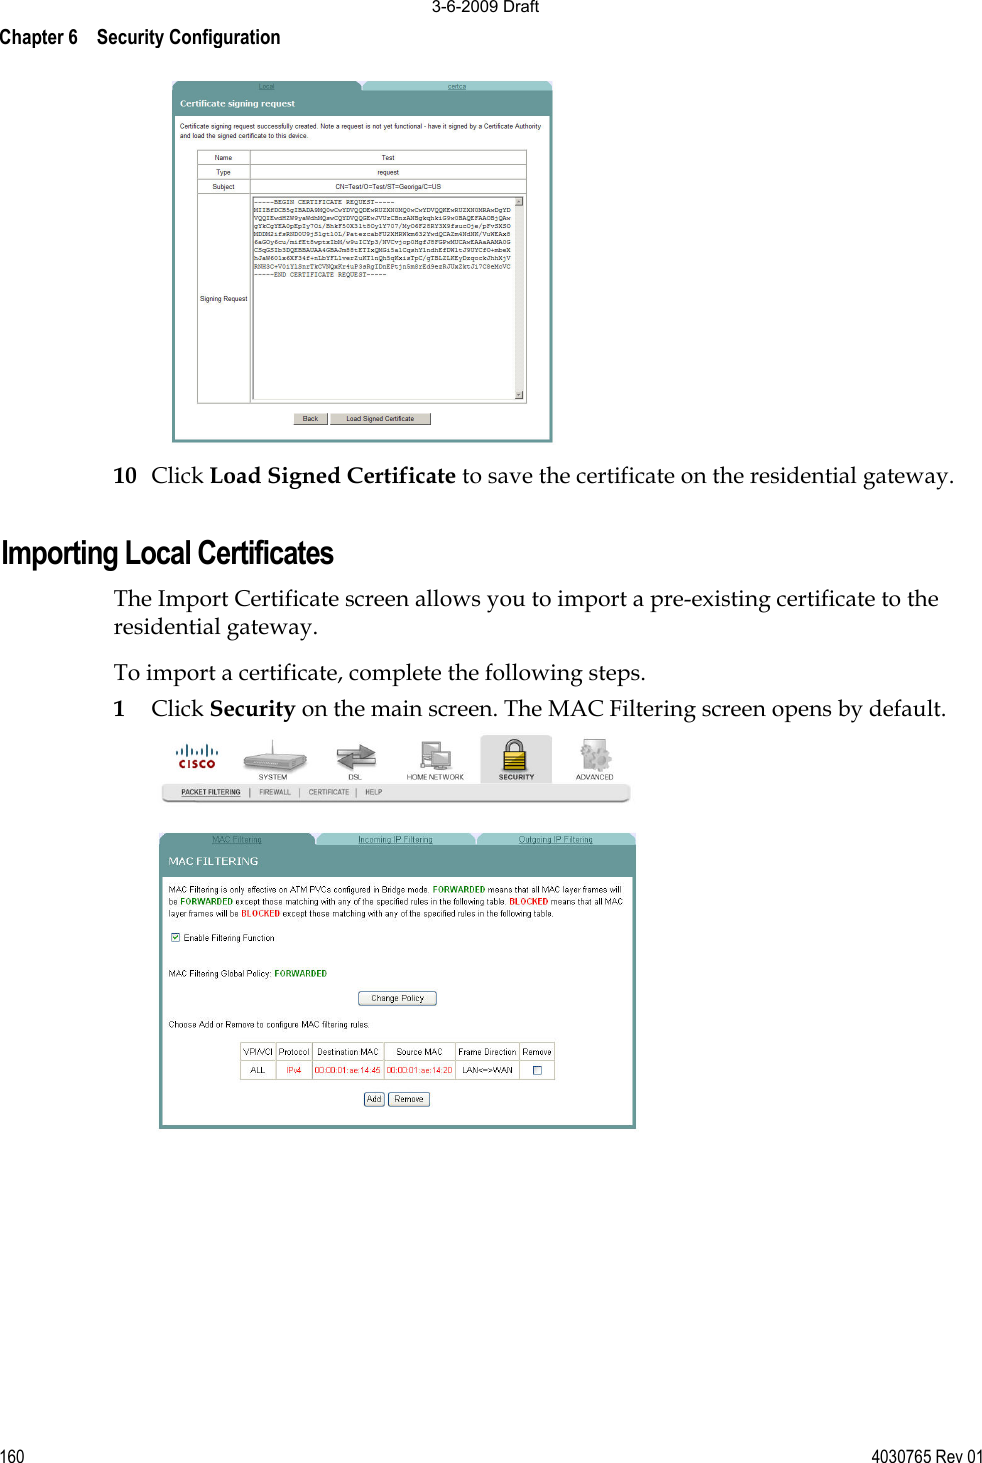 Chapter 6    Security Configuration 160 4030765 Rev 0110 Click Load Signed Certificate to save the certificate on the residential gateway. Importing Local Certificates The Import Certificate screen allows you to import a pre-existing certificate to the residential gateway. To import a certificate, complete the following steps. 1Click Security on the main screen. The MAC Filtering screen opens by default. 3-6-2009 Draft